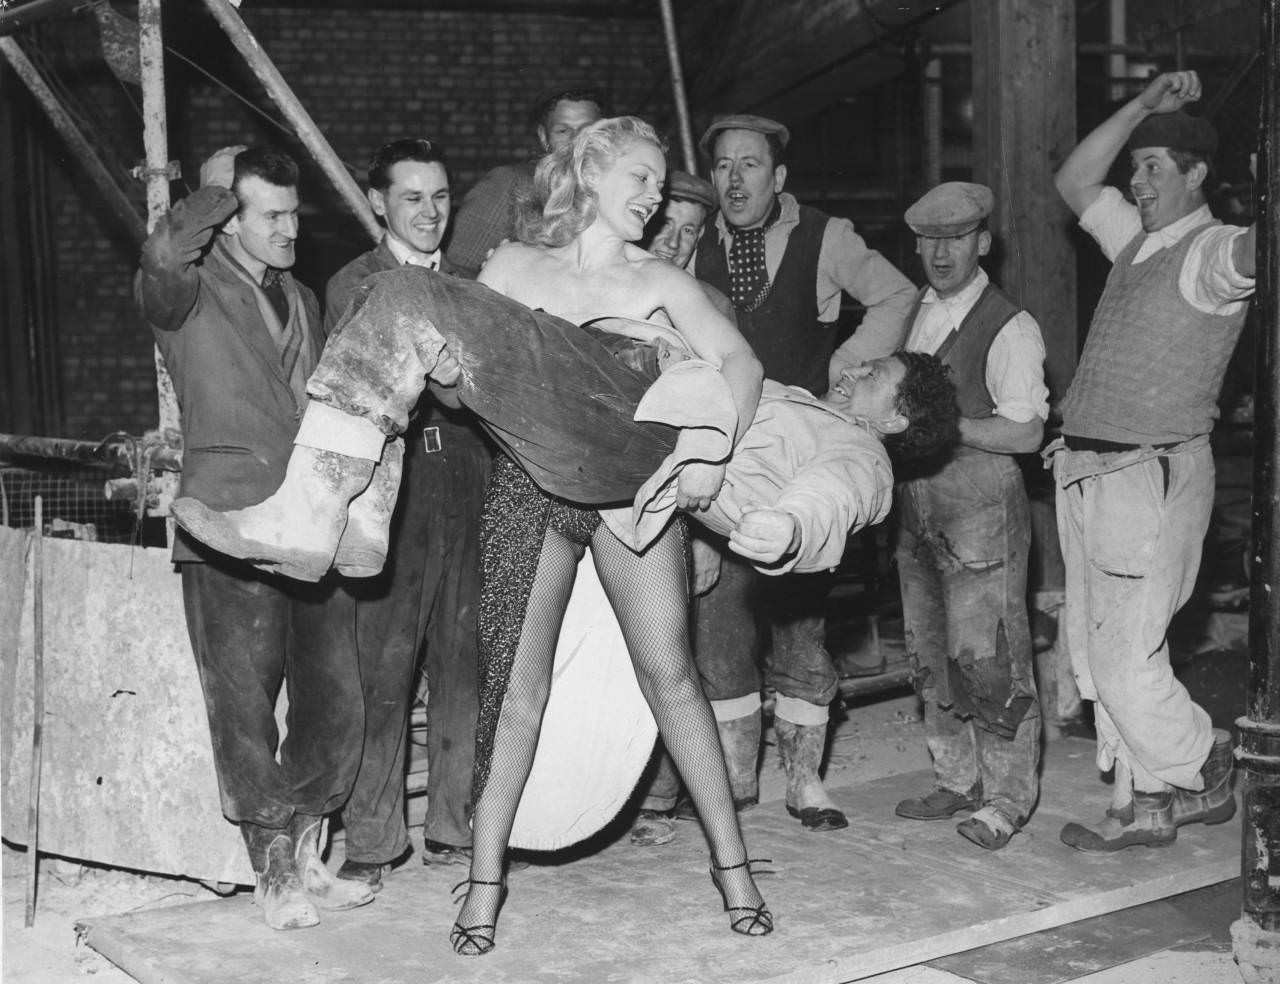 (Joan Rhodes lifting a worker up with ease to every ones amazement in 1958). She started in the 1950s when she began do cabaret performances often showing her grace then surprising the audience with her immense strength. She did this through London as she grew in popularity. She even lifted giant Ted Evans who reportedly weighed 480 pounds.